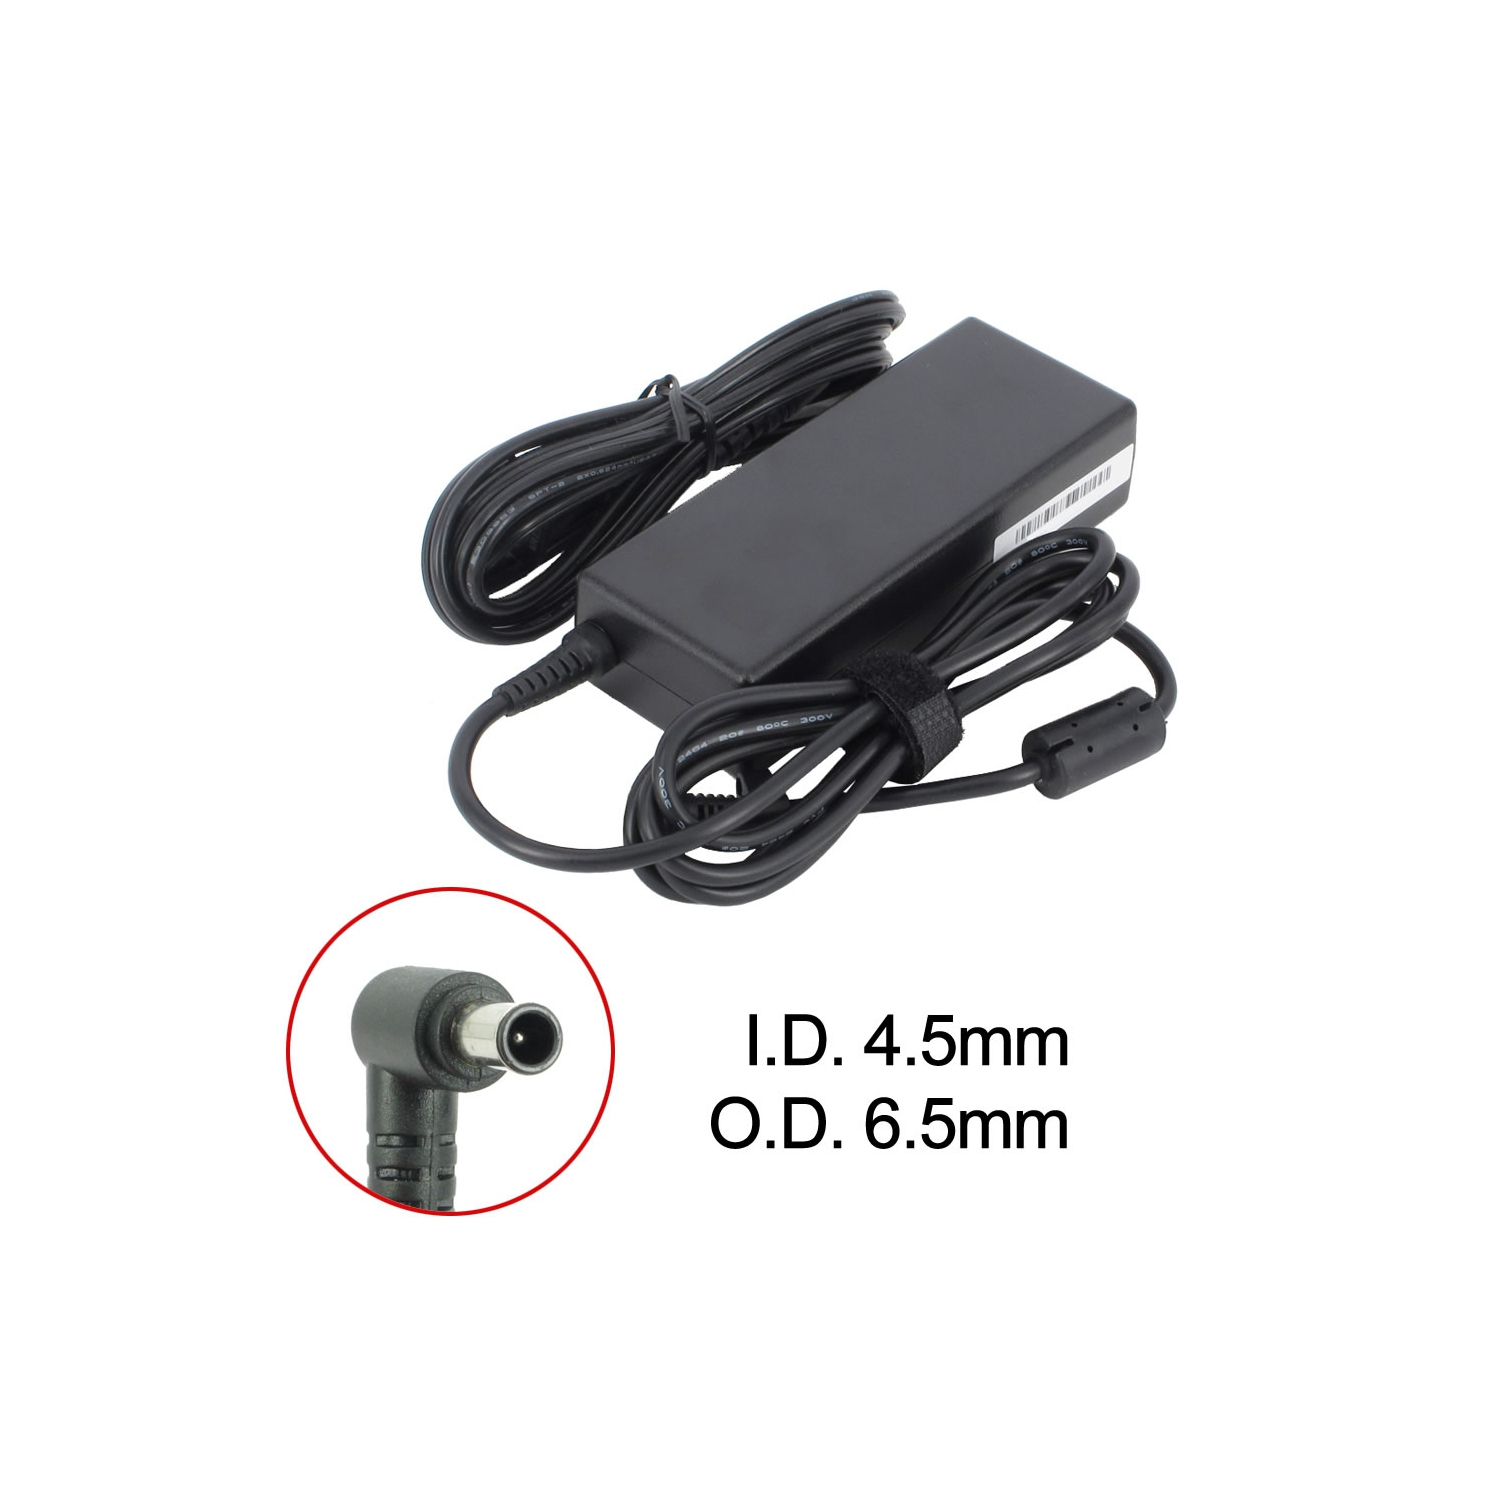 Brand New Laptop AC Adapter for Sony VAIO VGN-FS93G, PCGA-AC19V11, VGP-AC19V10, VGP-AC19V21, VGP-AC19V31, VGP-AC19V67